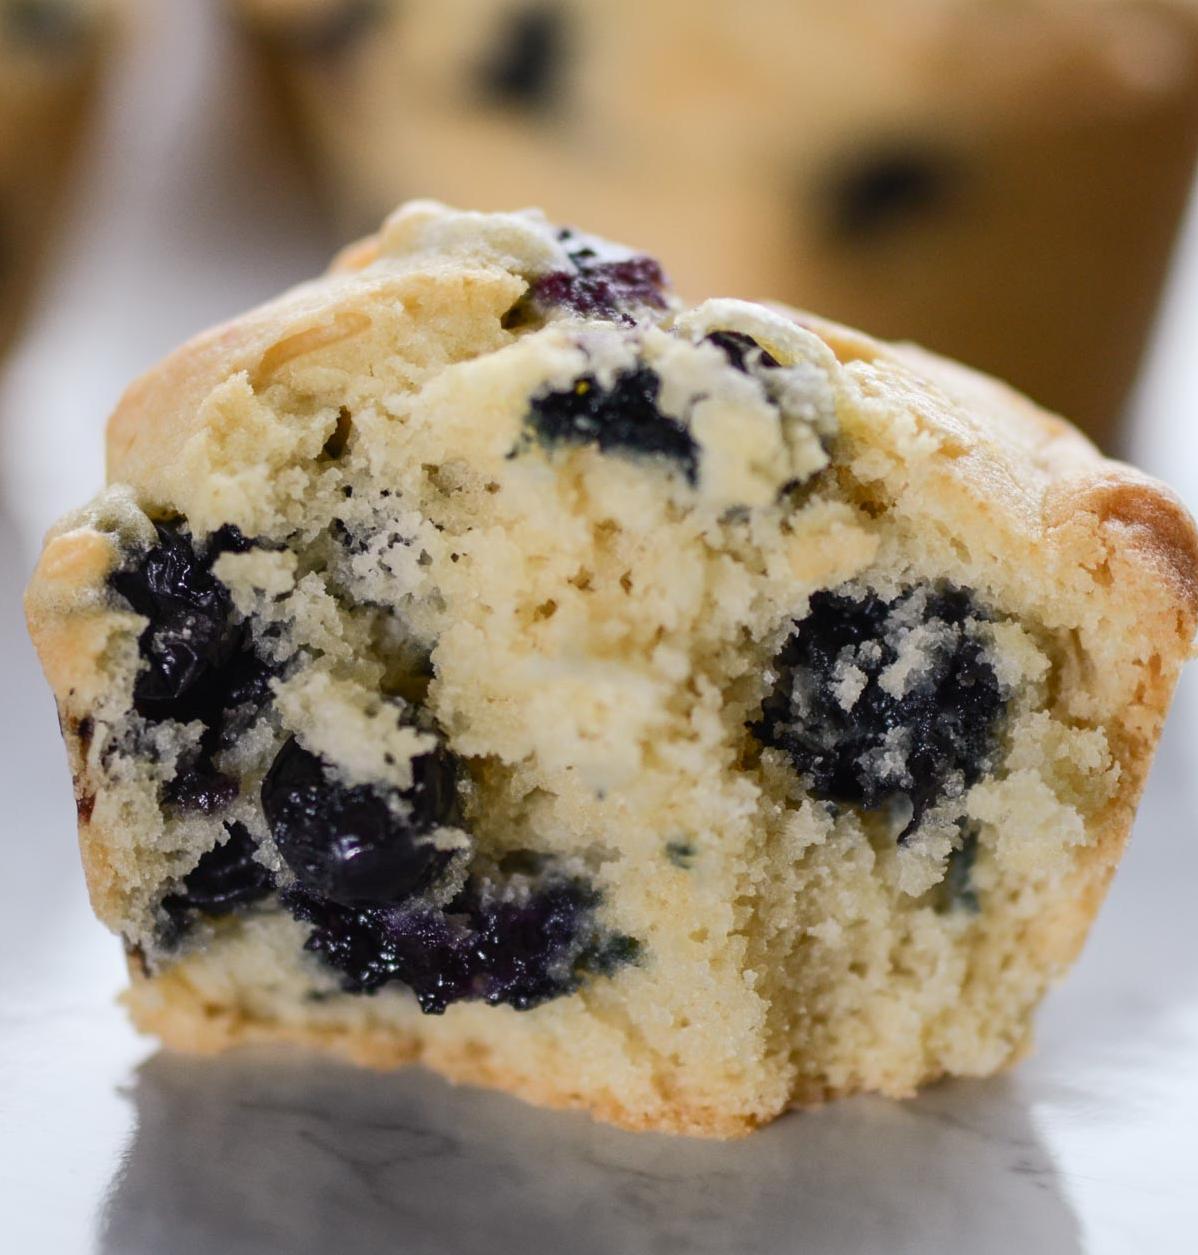  These muffins are berry delicious!